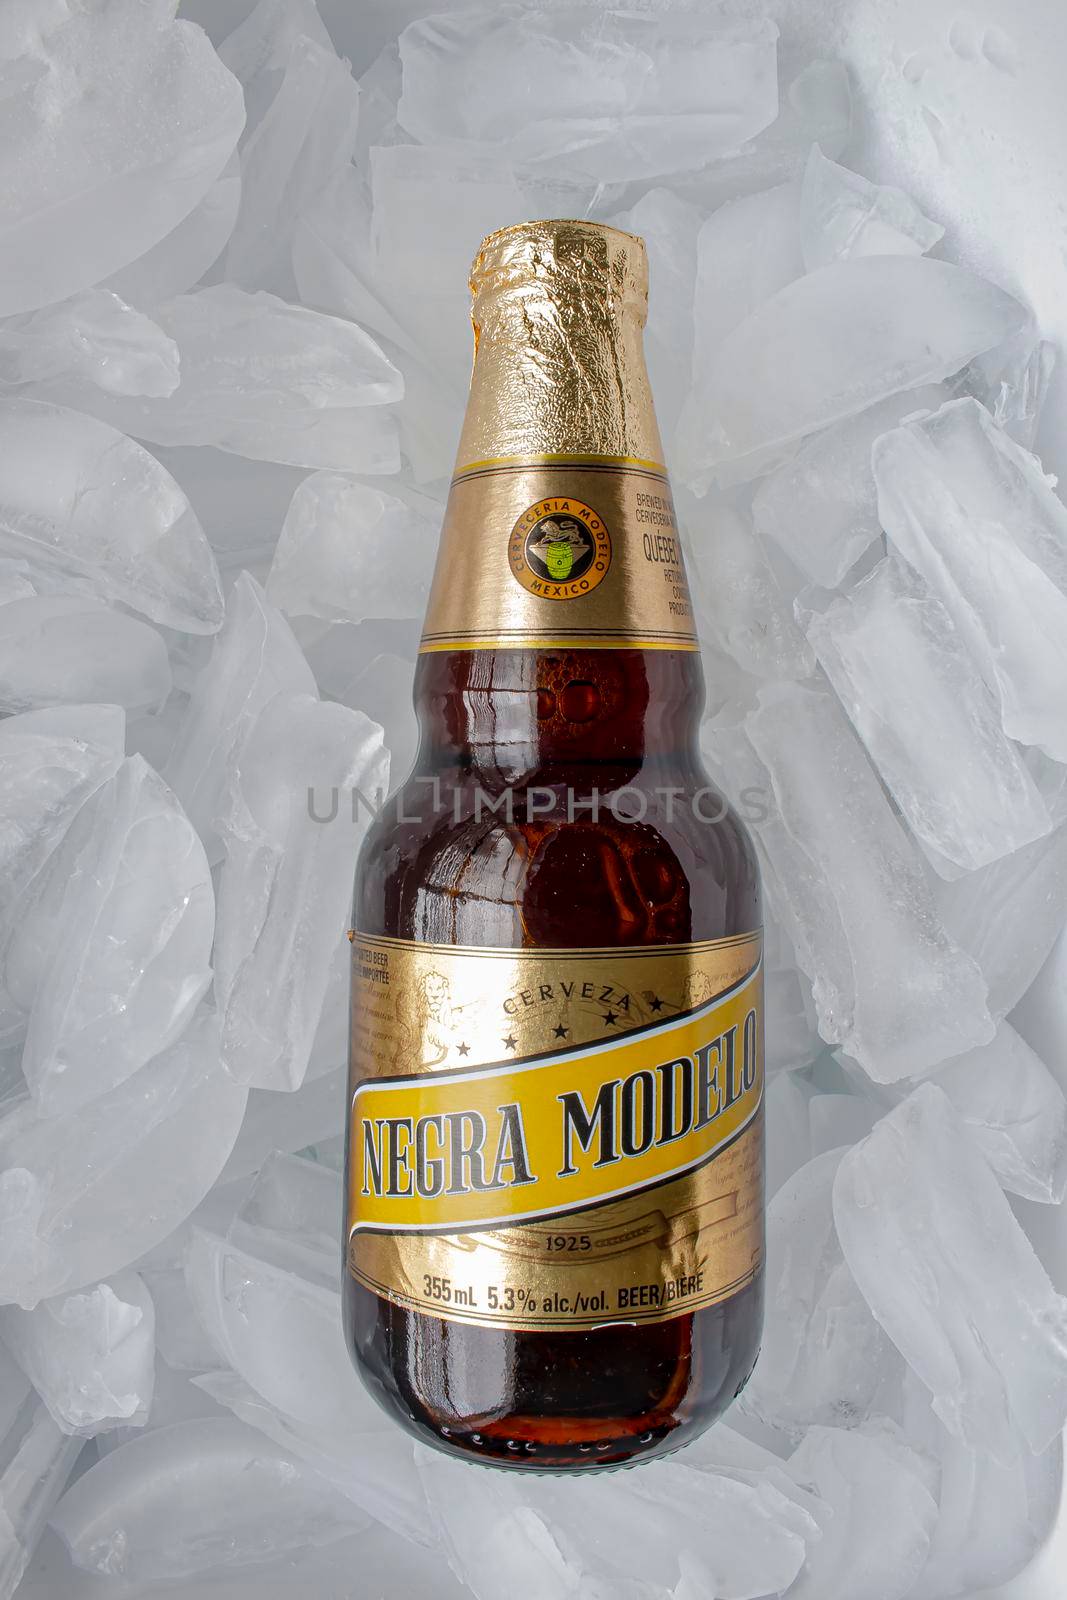 Calgary, Alberta, Canada. May 20, 2020. A Mexican beer Negra Modelo bottle on a bed of ice by oasisamuel